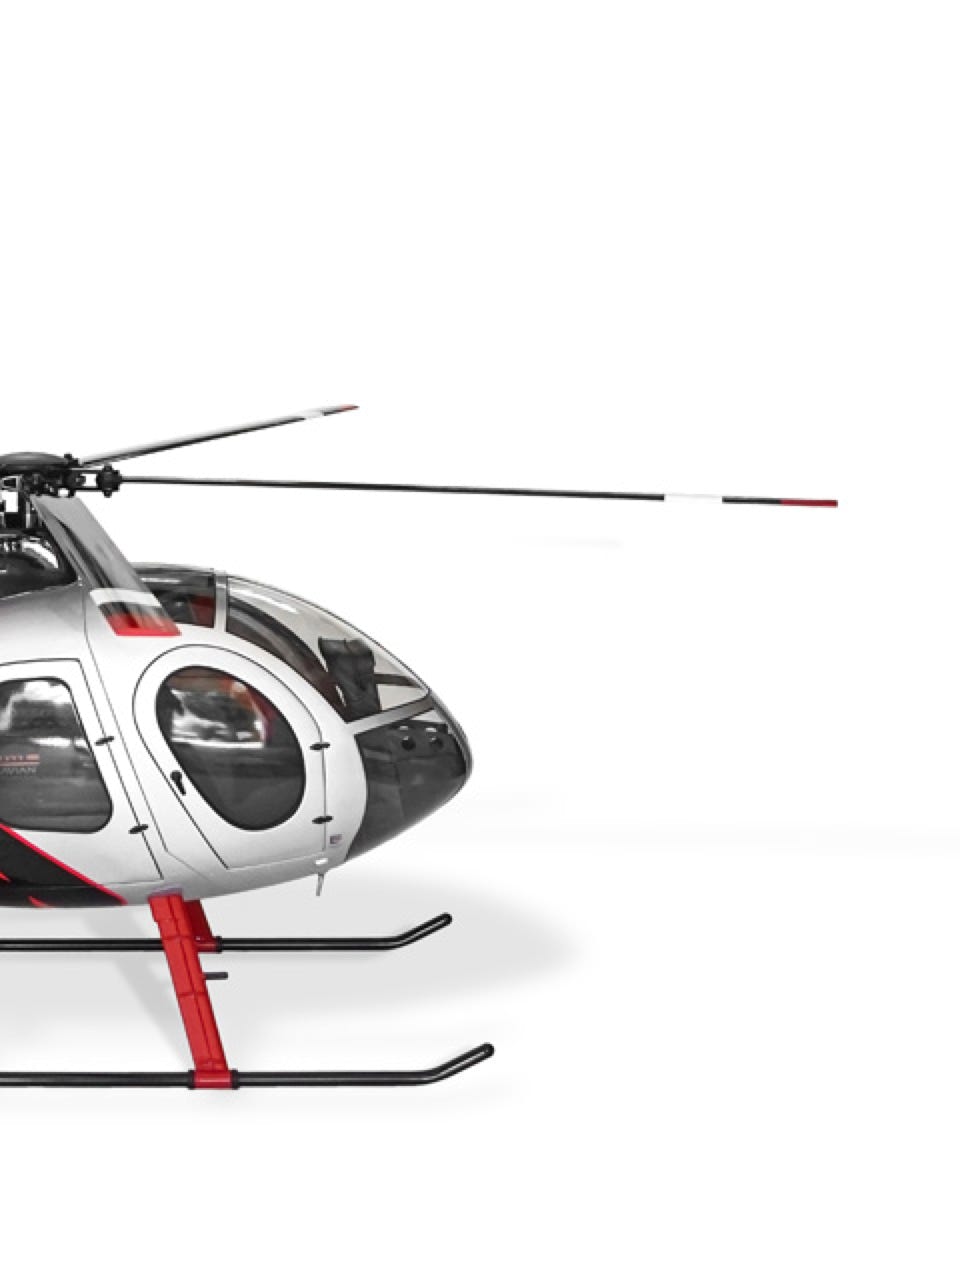 RC Model: MD550 SE / Special Edition RC helicopter model aircraft